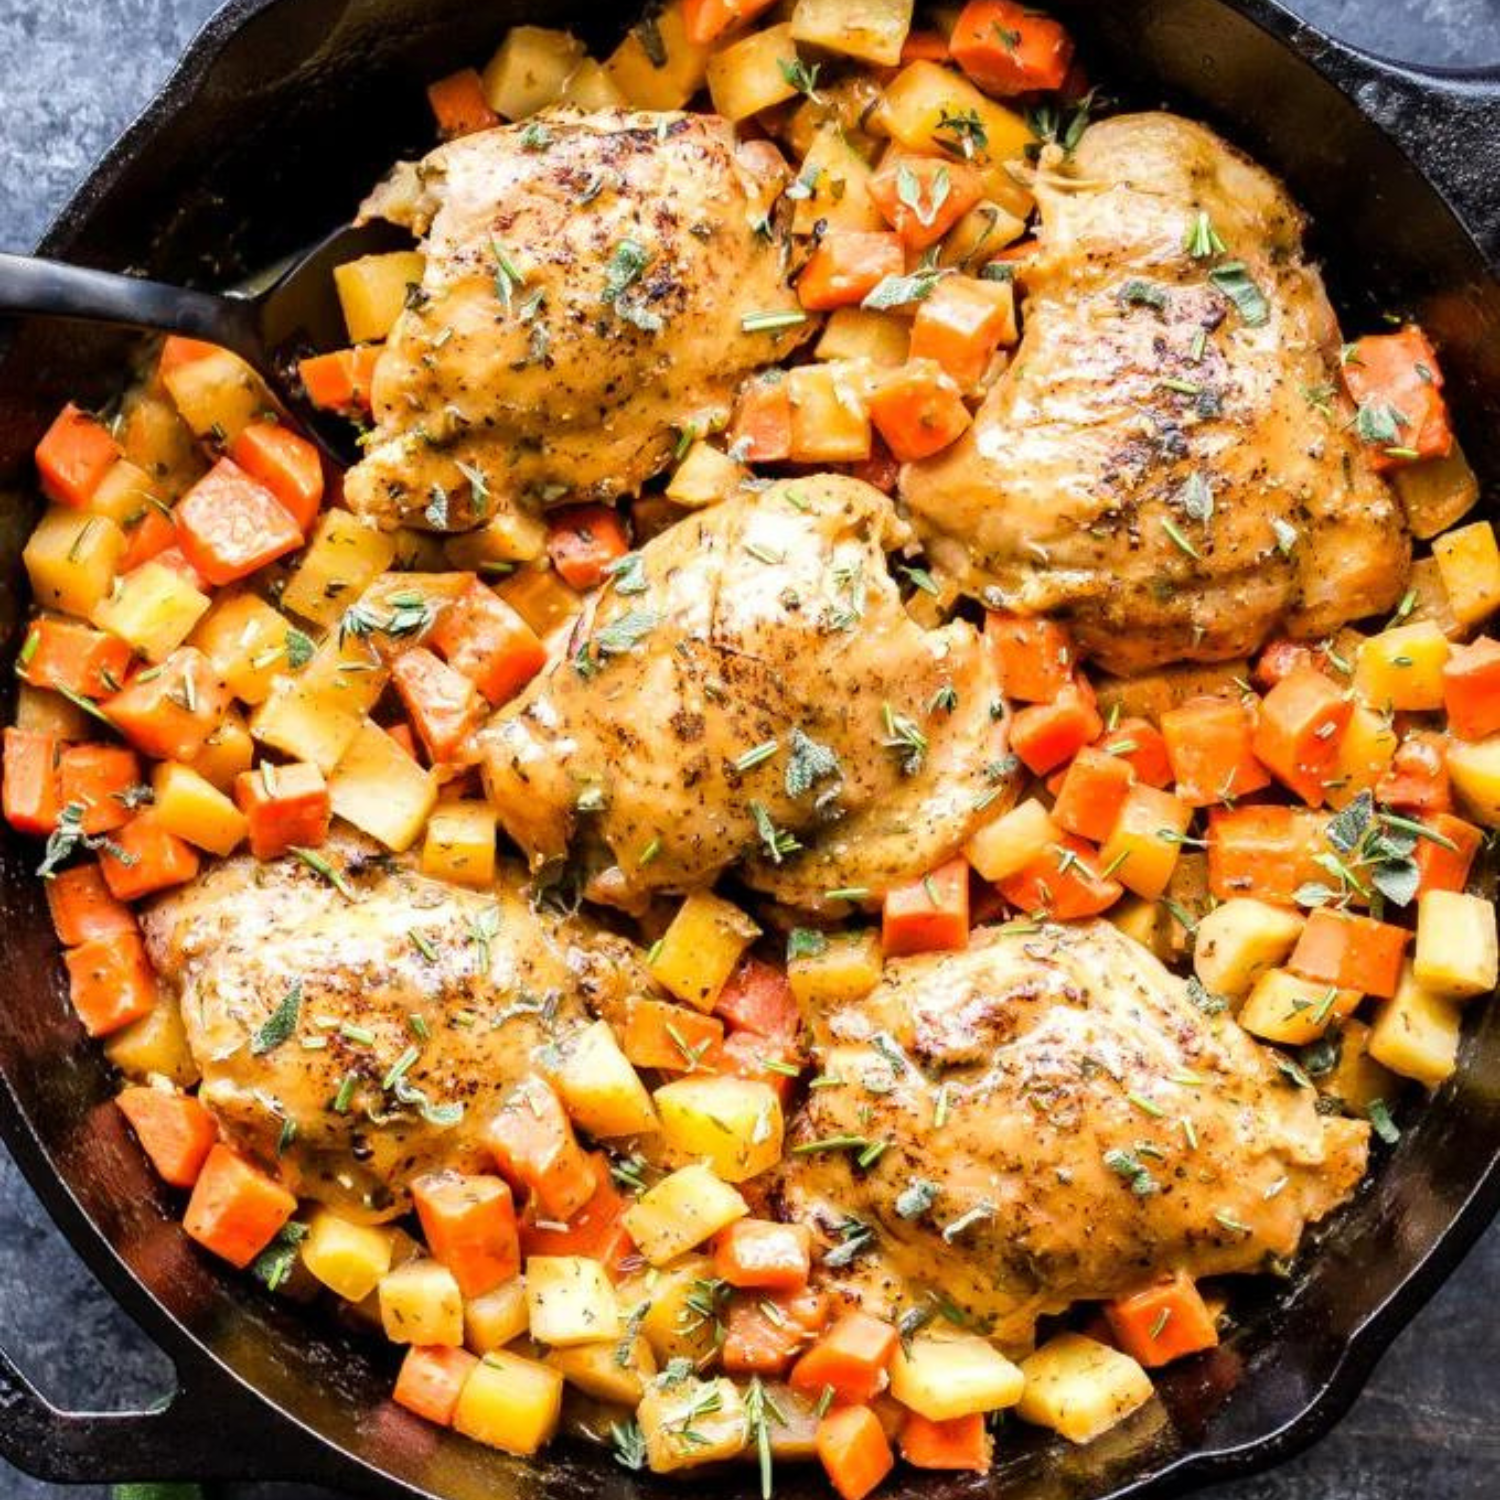 a cast iron skillet with roasted cubed root vegetables with baked chicken thighs in an apricot jam glaze